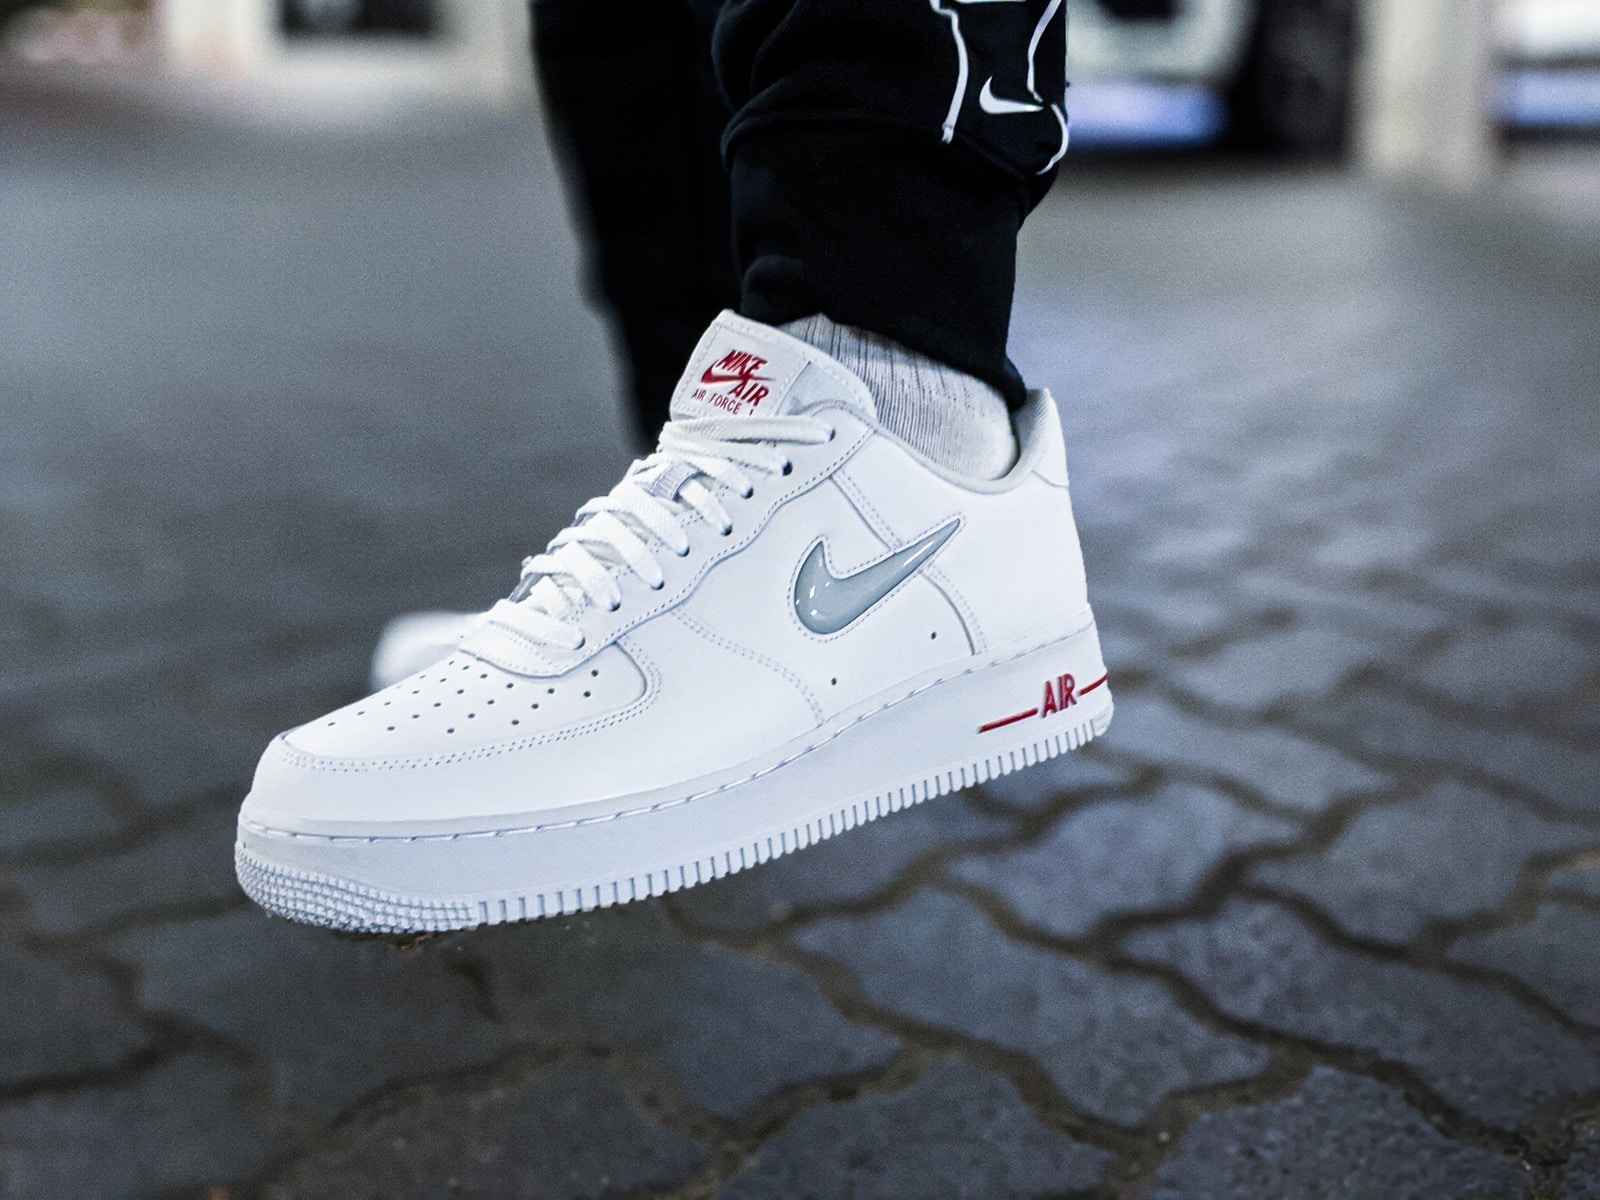 person wearing white nike air force 1